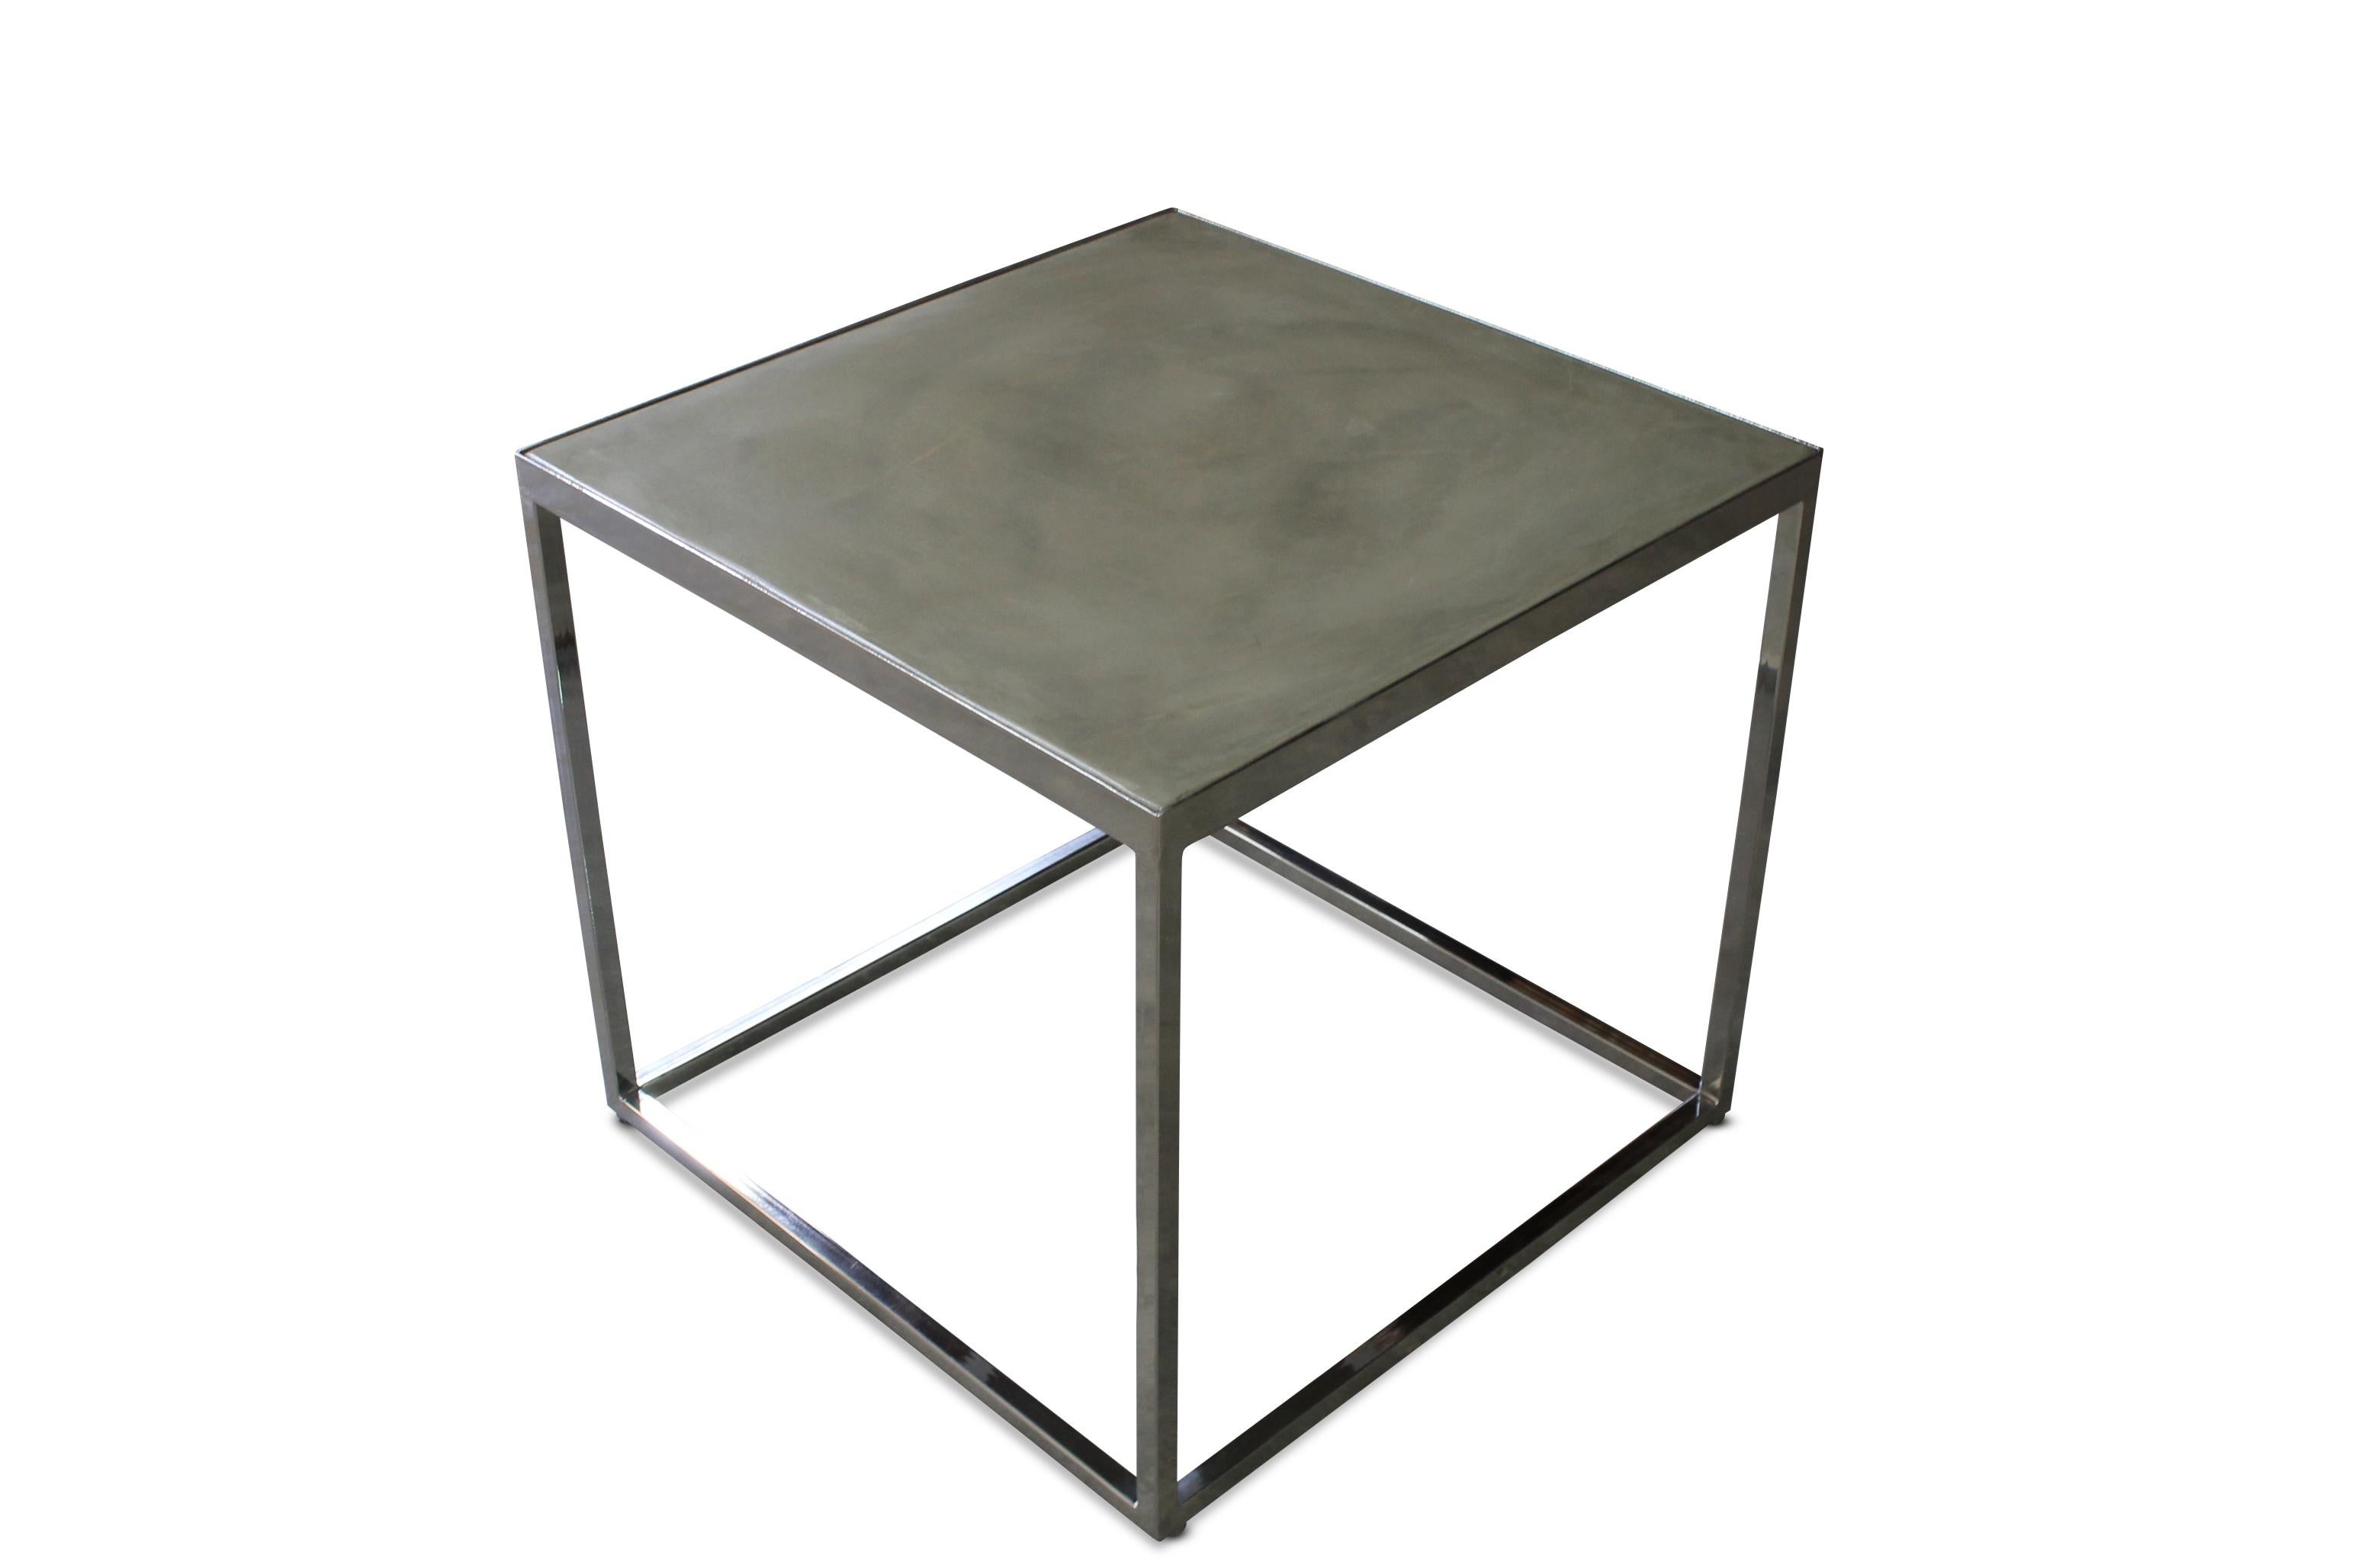 Minimalist Modern Polished Steel and Concrete Side Table by Costantini, Jesse For Sale